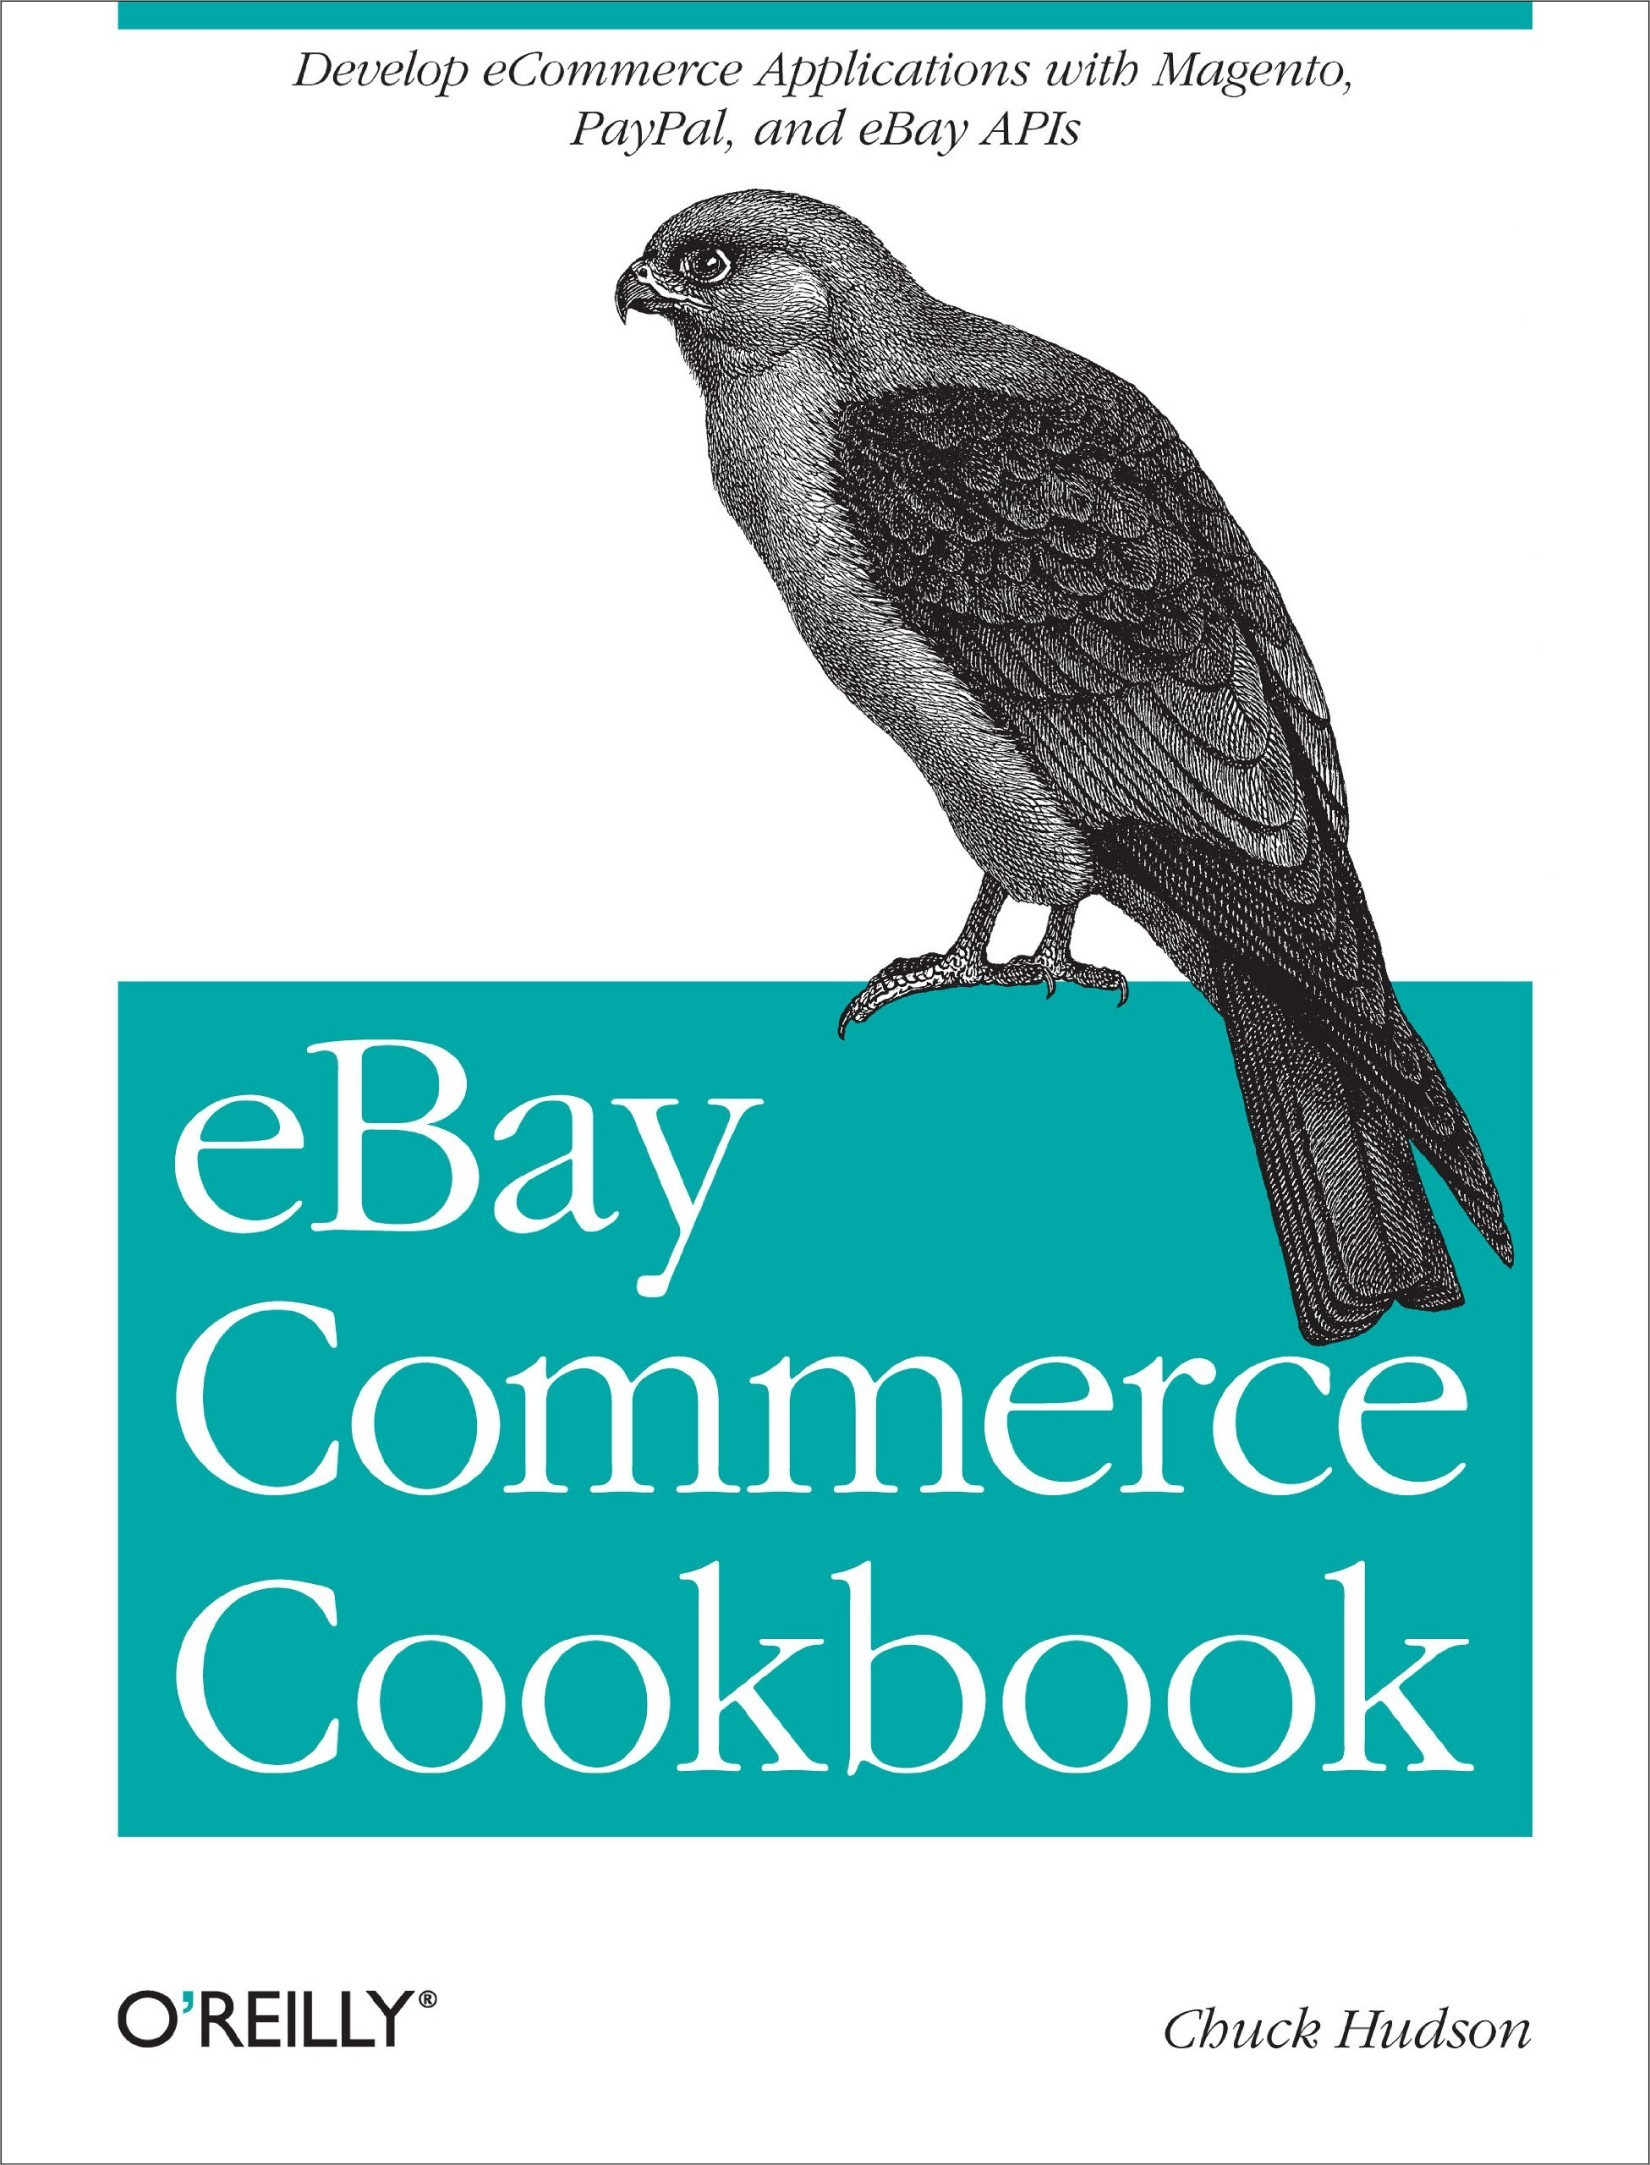 EBay Commerce Cookbook: Using EBay APIs: PayPal, Magento and More